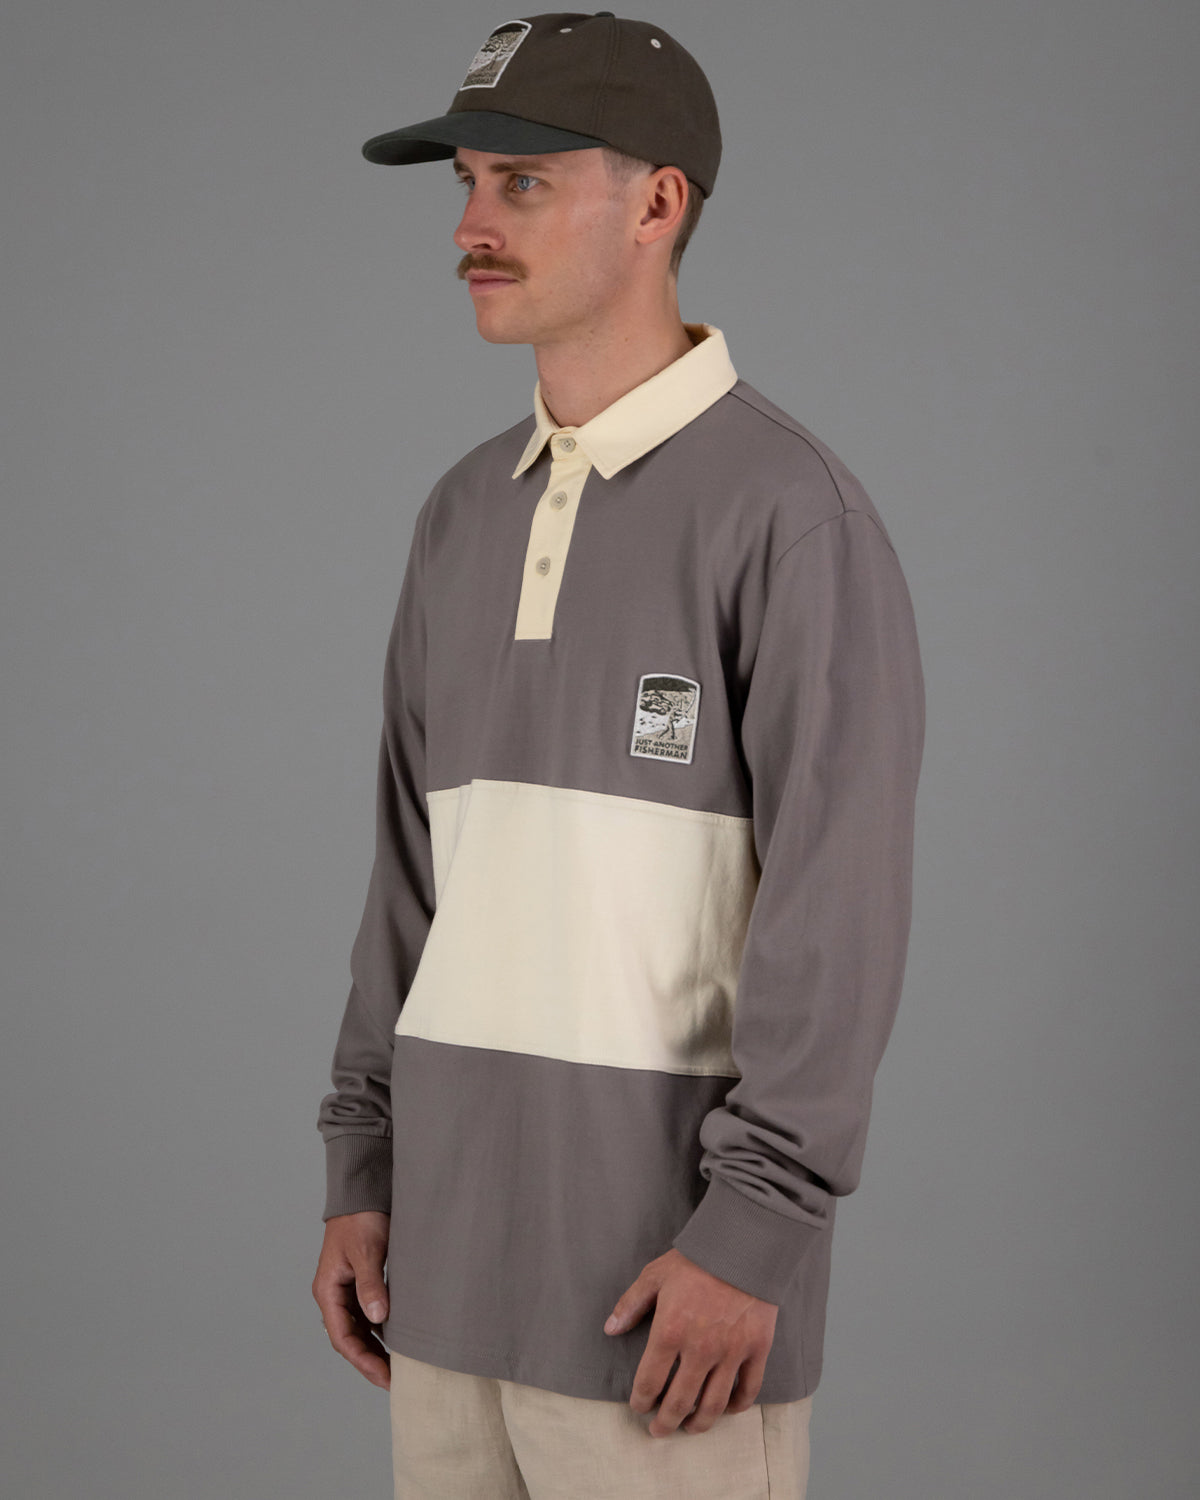 Just Another Fisherman Coastal Cast Polo - Grey/Cream